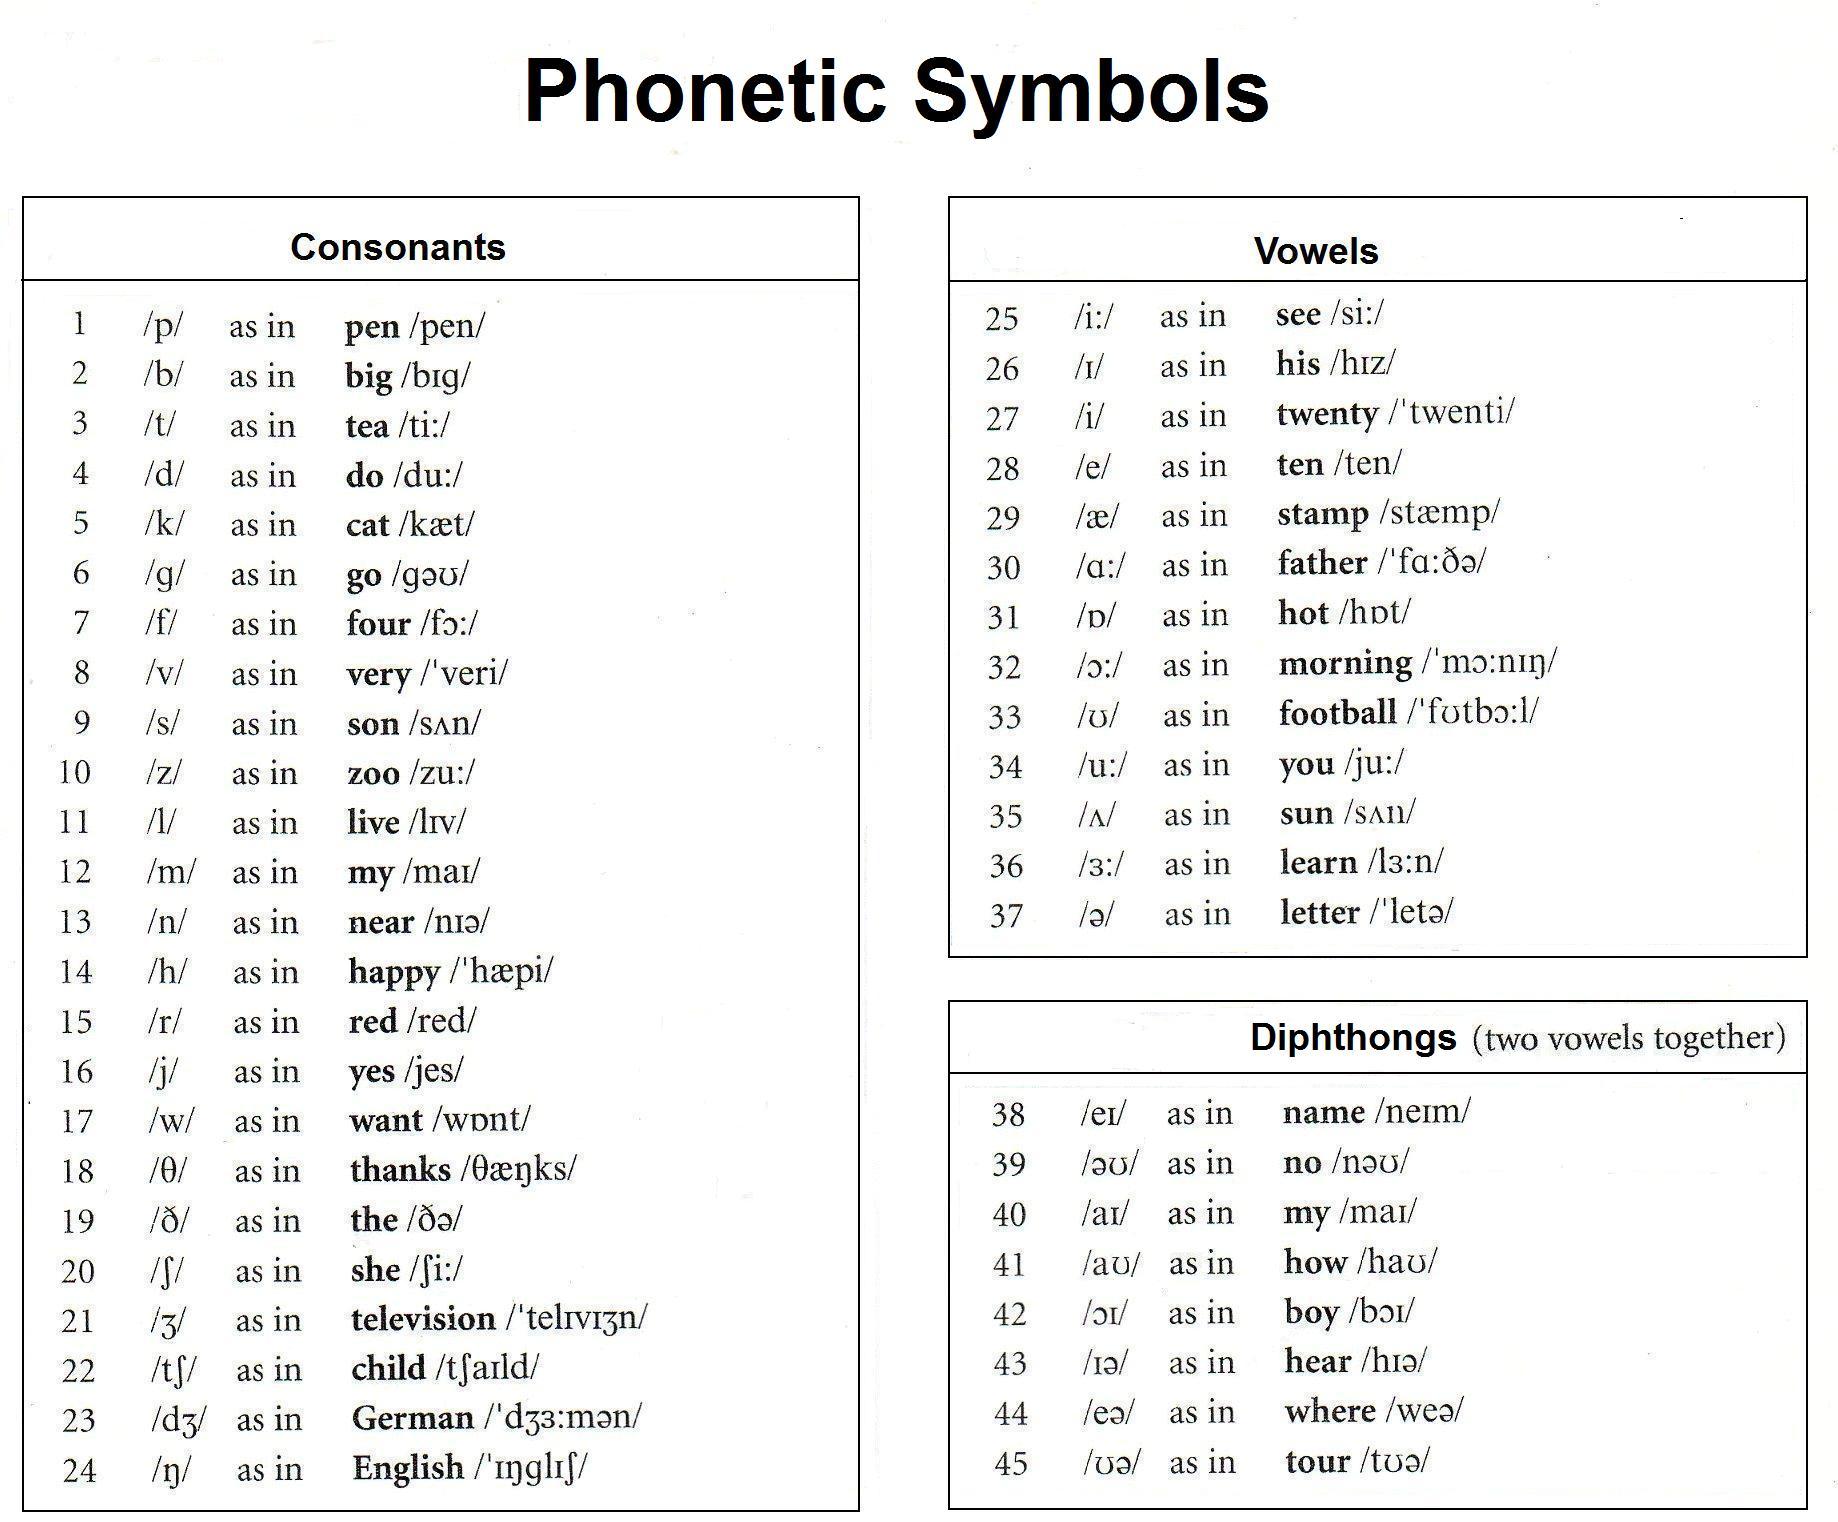 Phonetic Symbols For English Phonetic Alphabet And Their Sounds Dict 